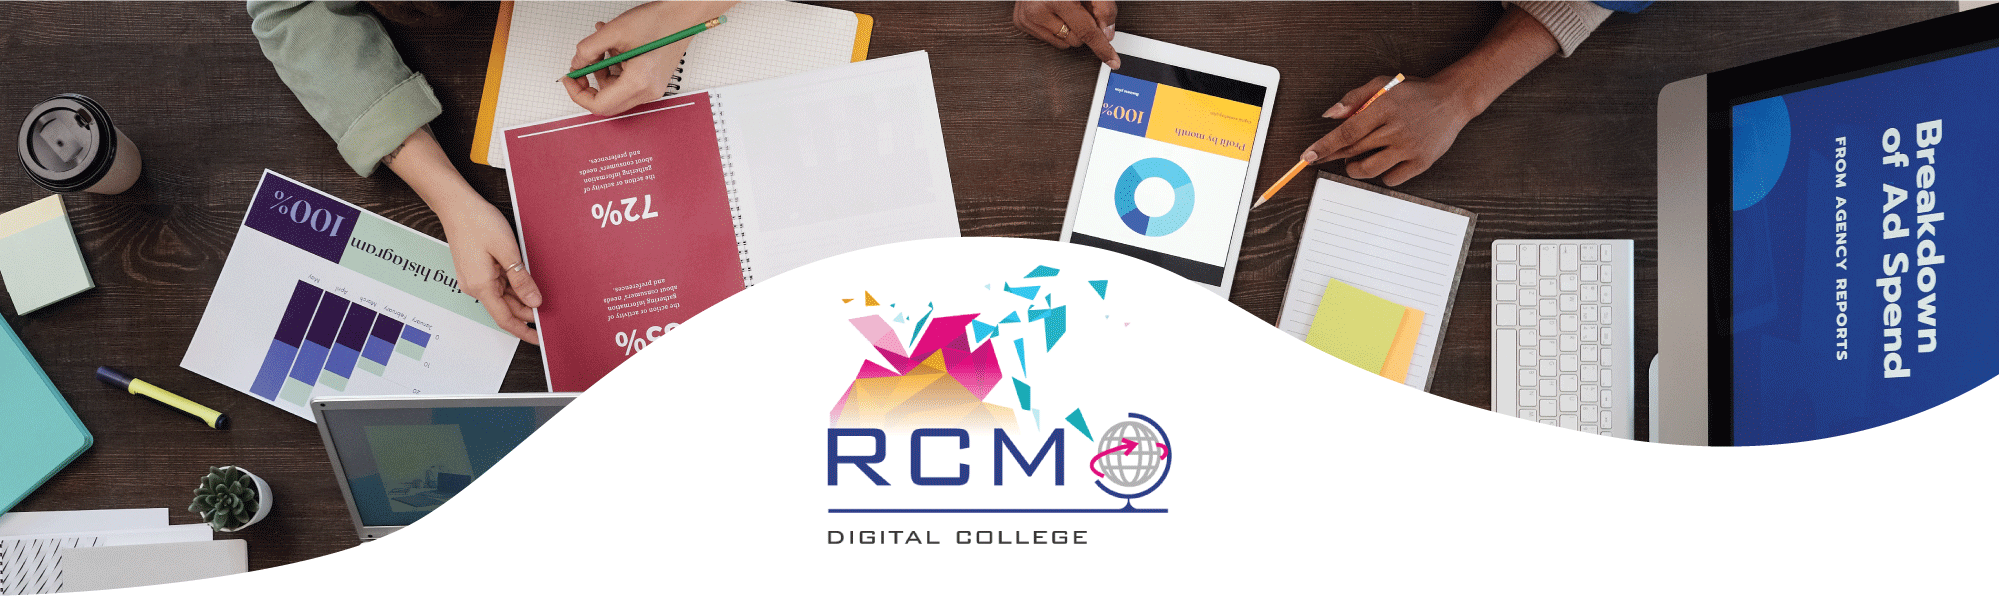 Digital College South Africa